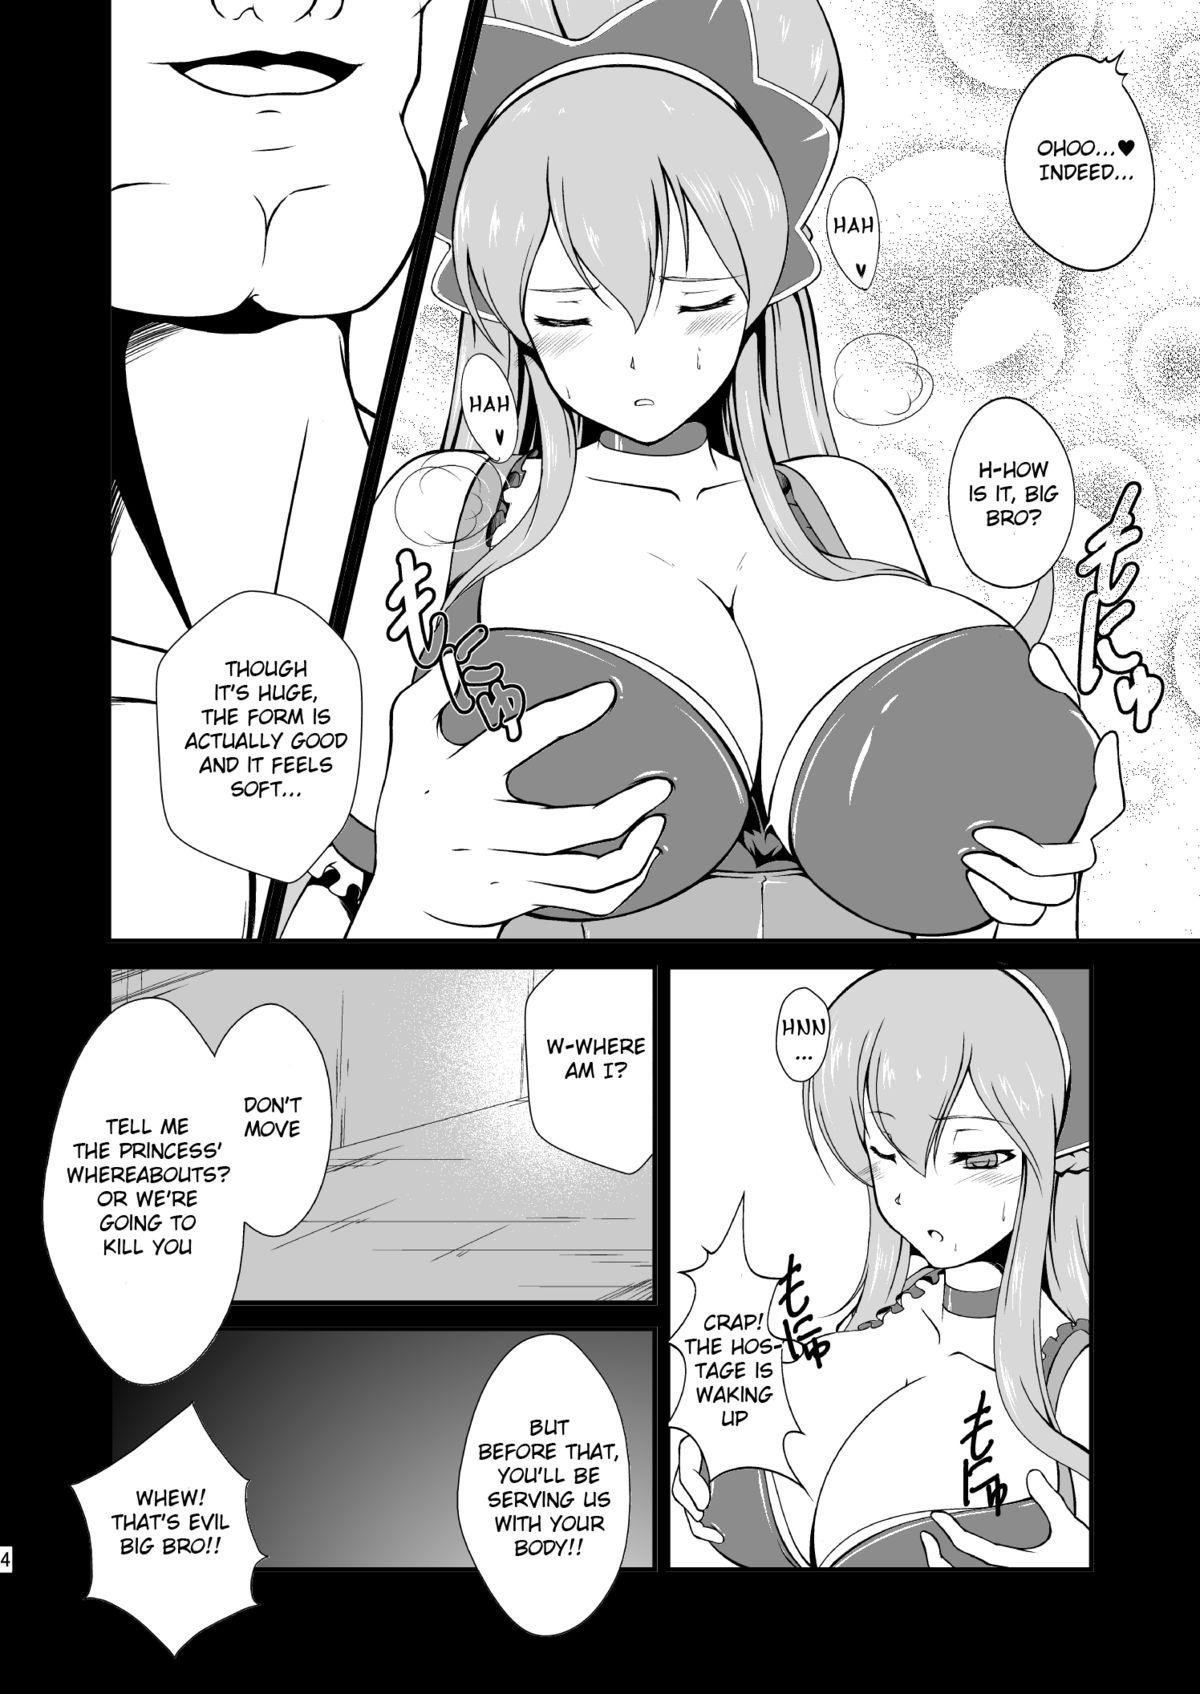 Missionary anal bitch - Ixion saga dt Blowjob - Page 5